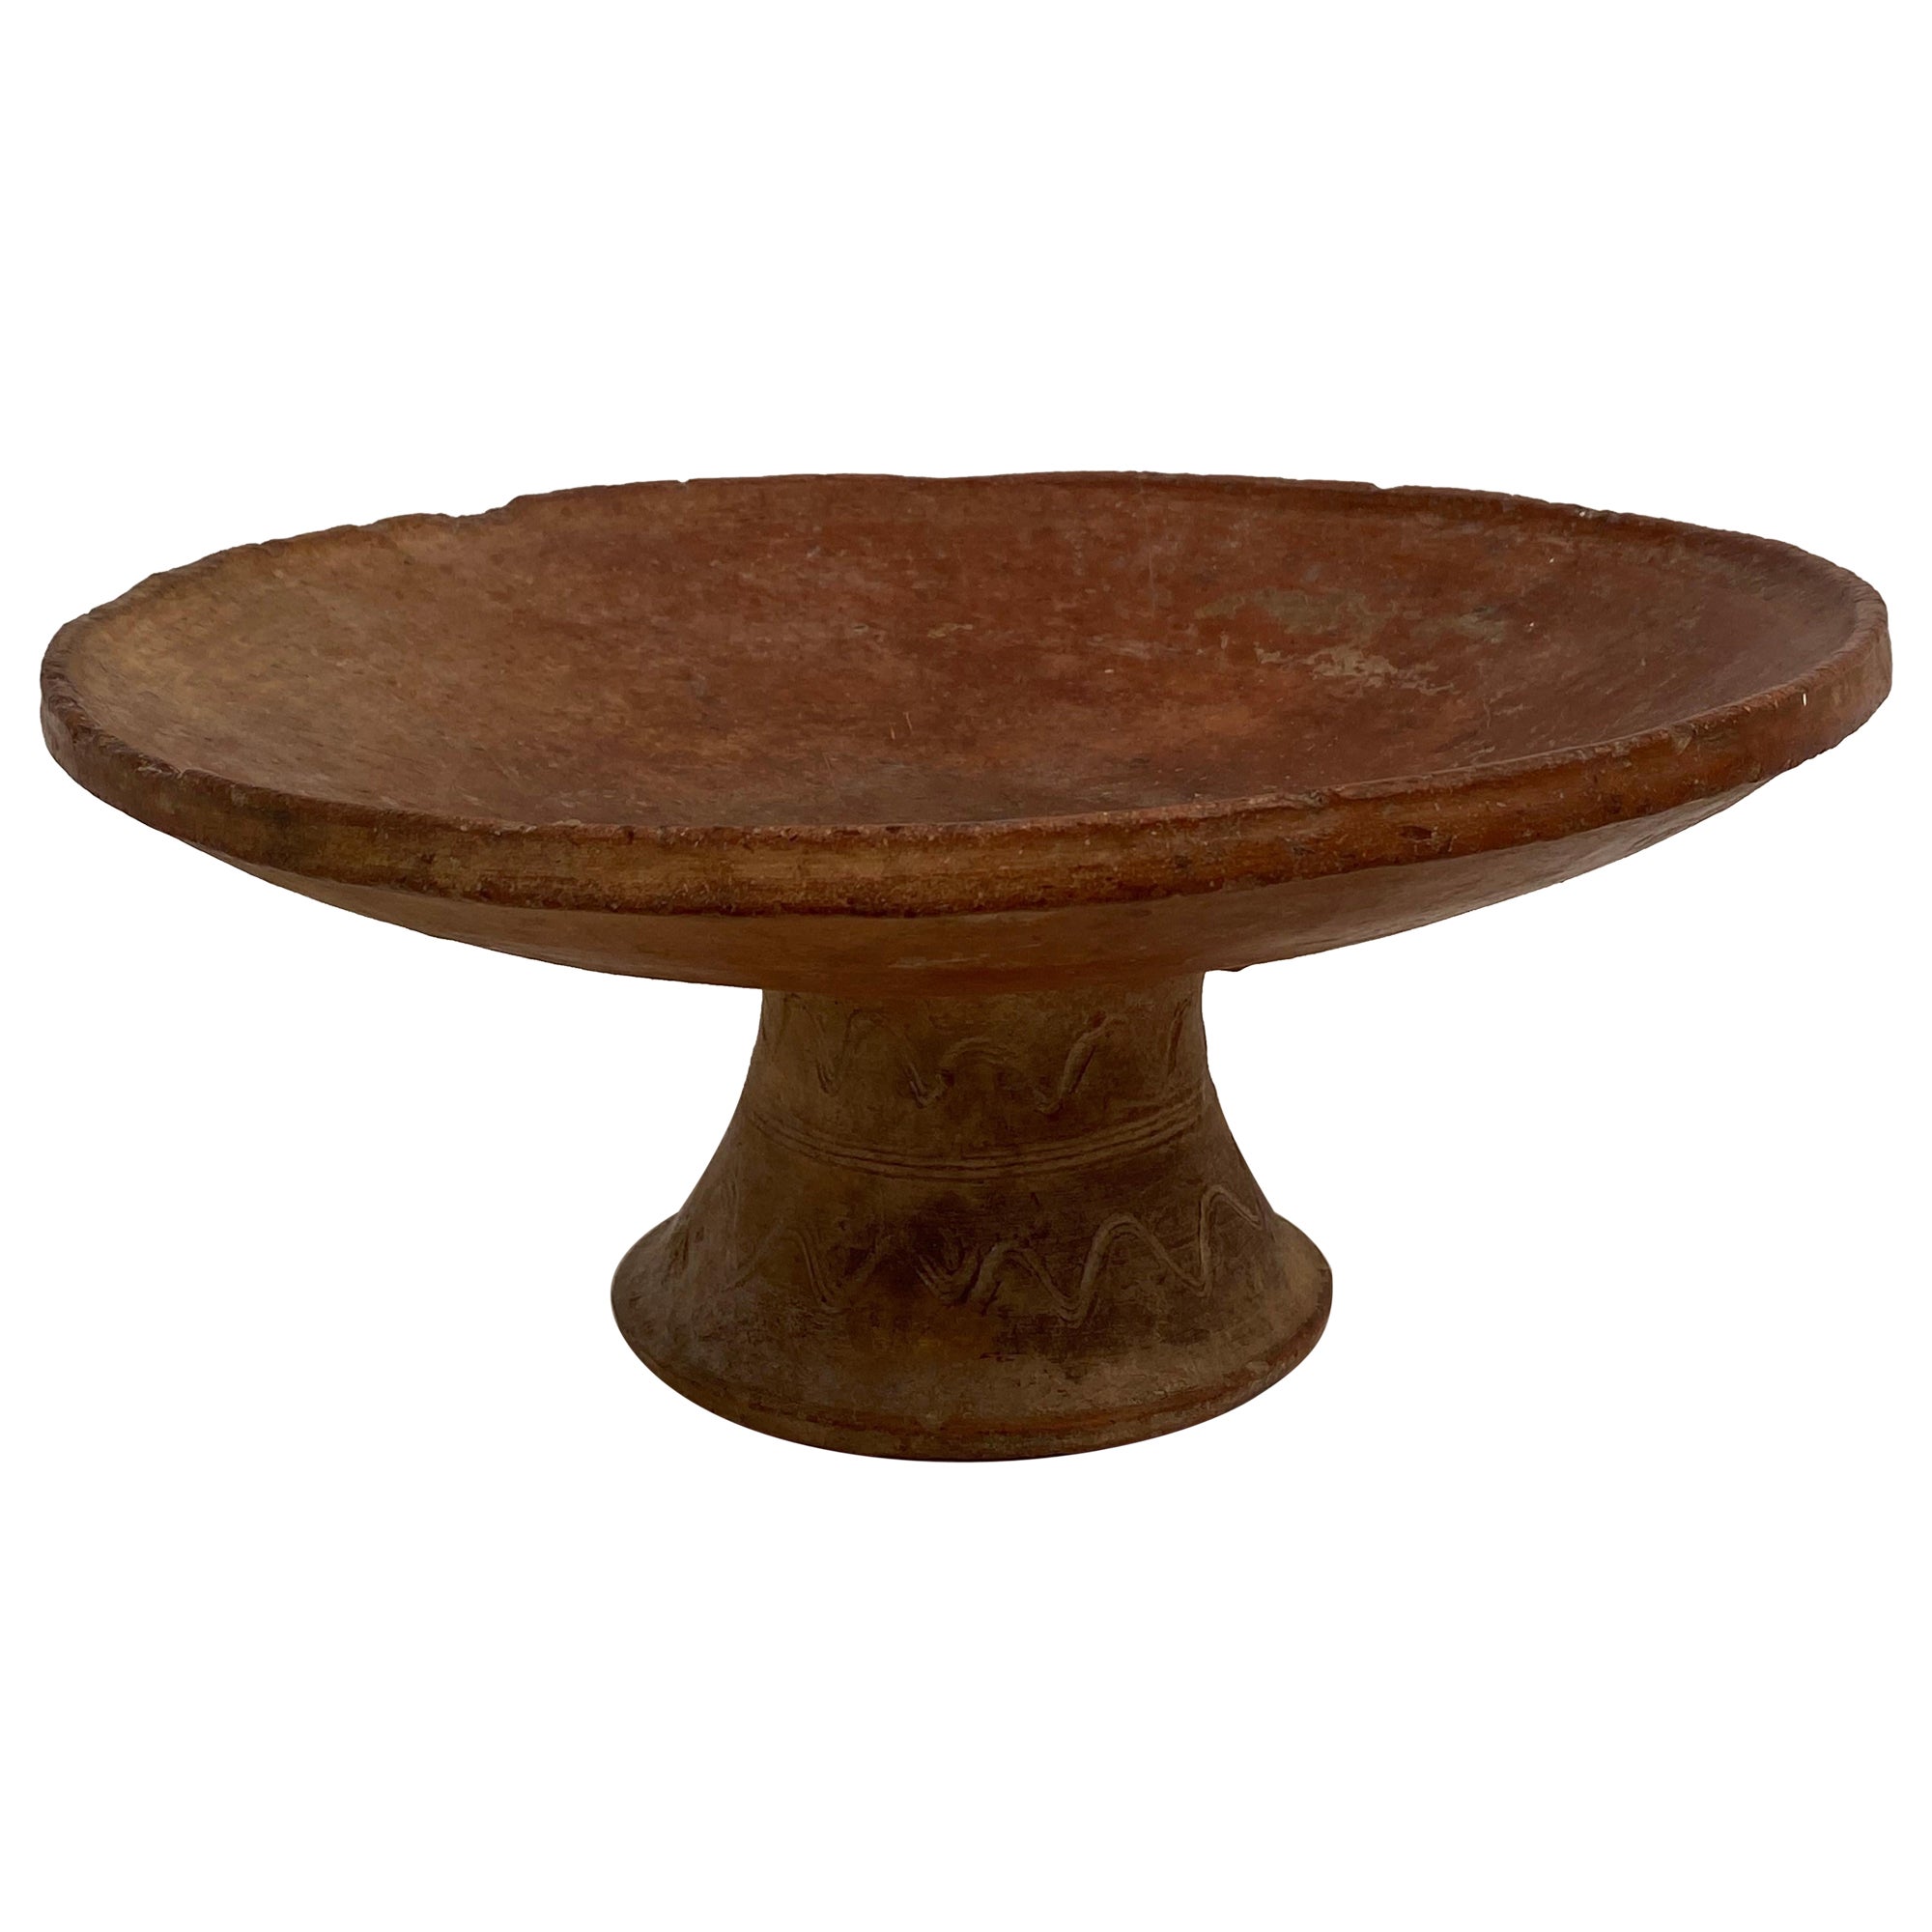 Antique Berber Terracotta Bowl on a central foot For Sale